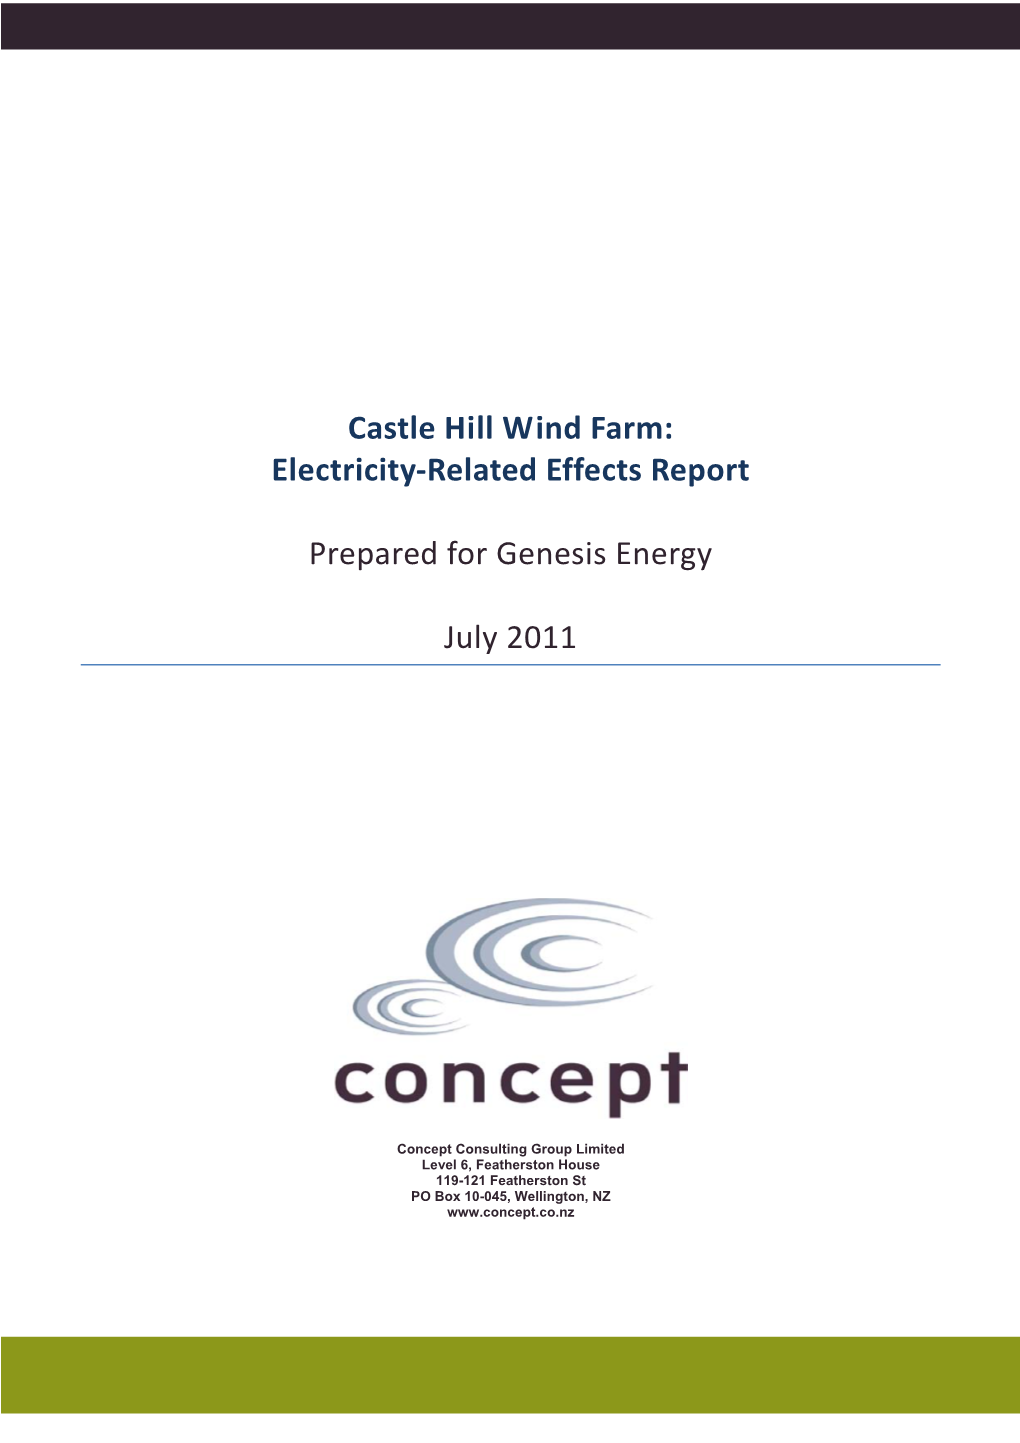 Castle Hill Wind Farm: Electricity-Related Effects Report